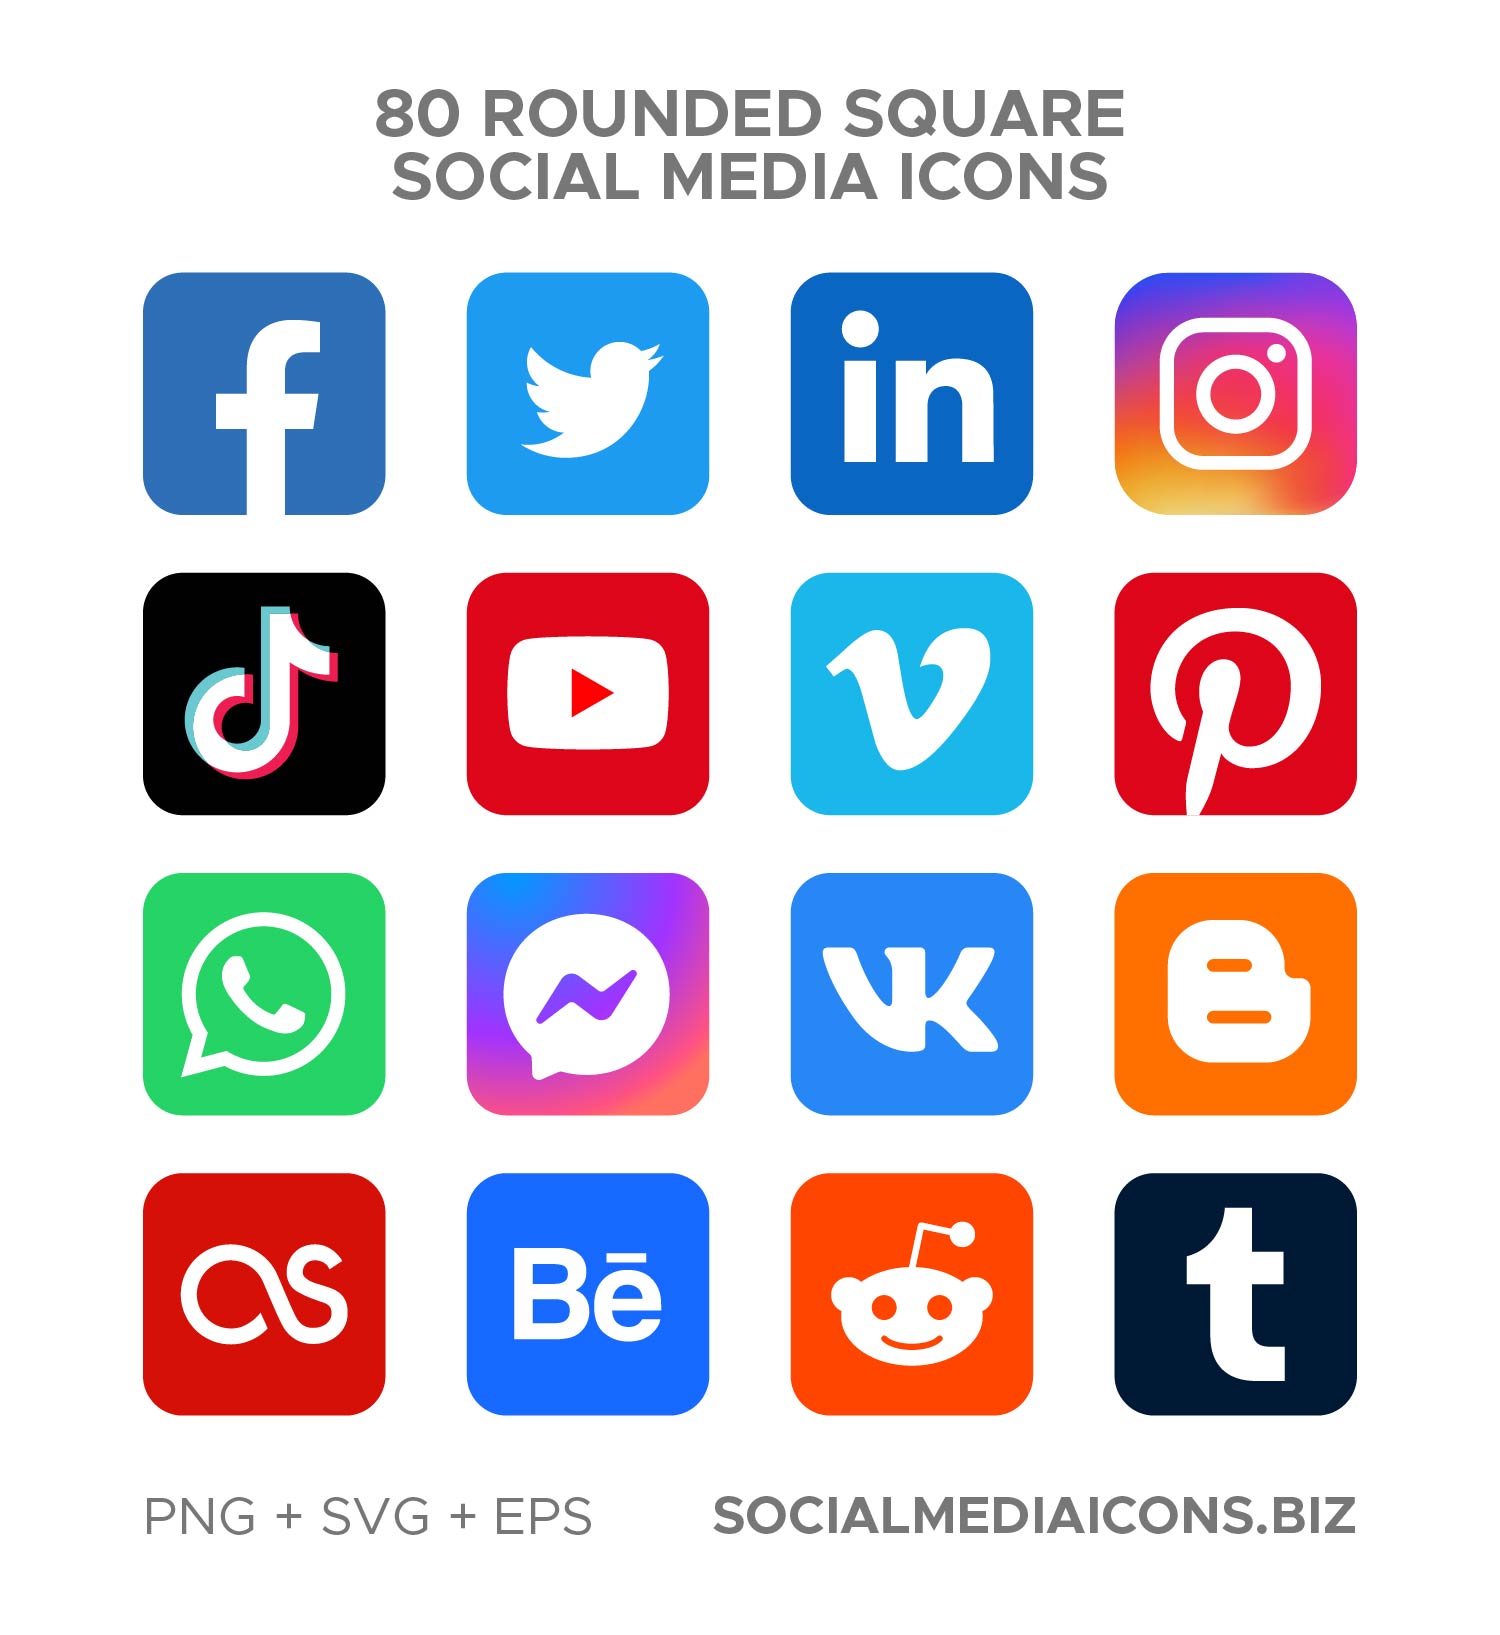 80 Rounded Square Social Media Icons